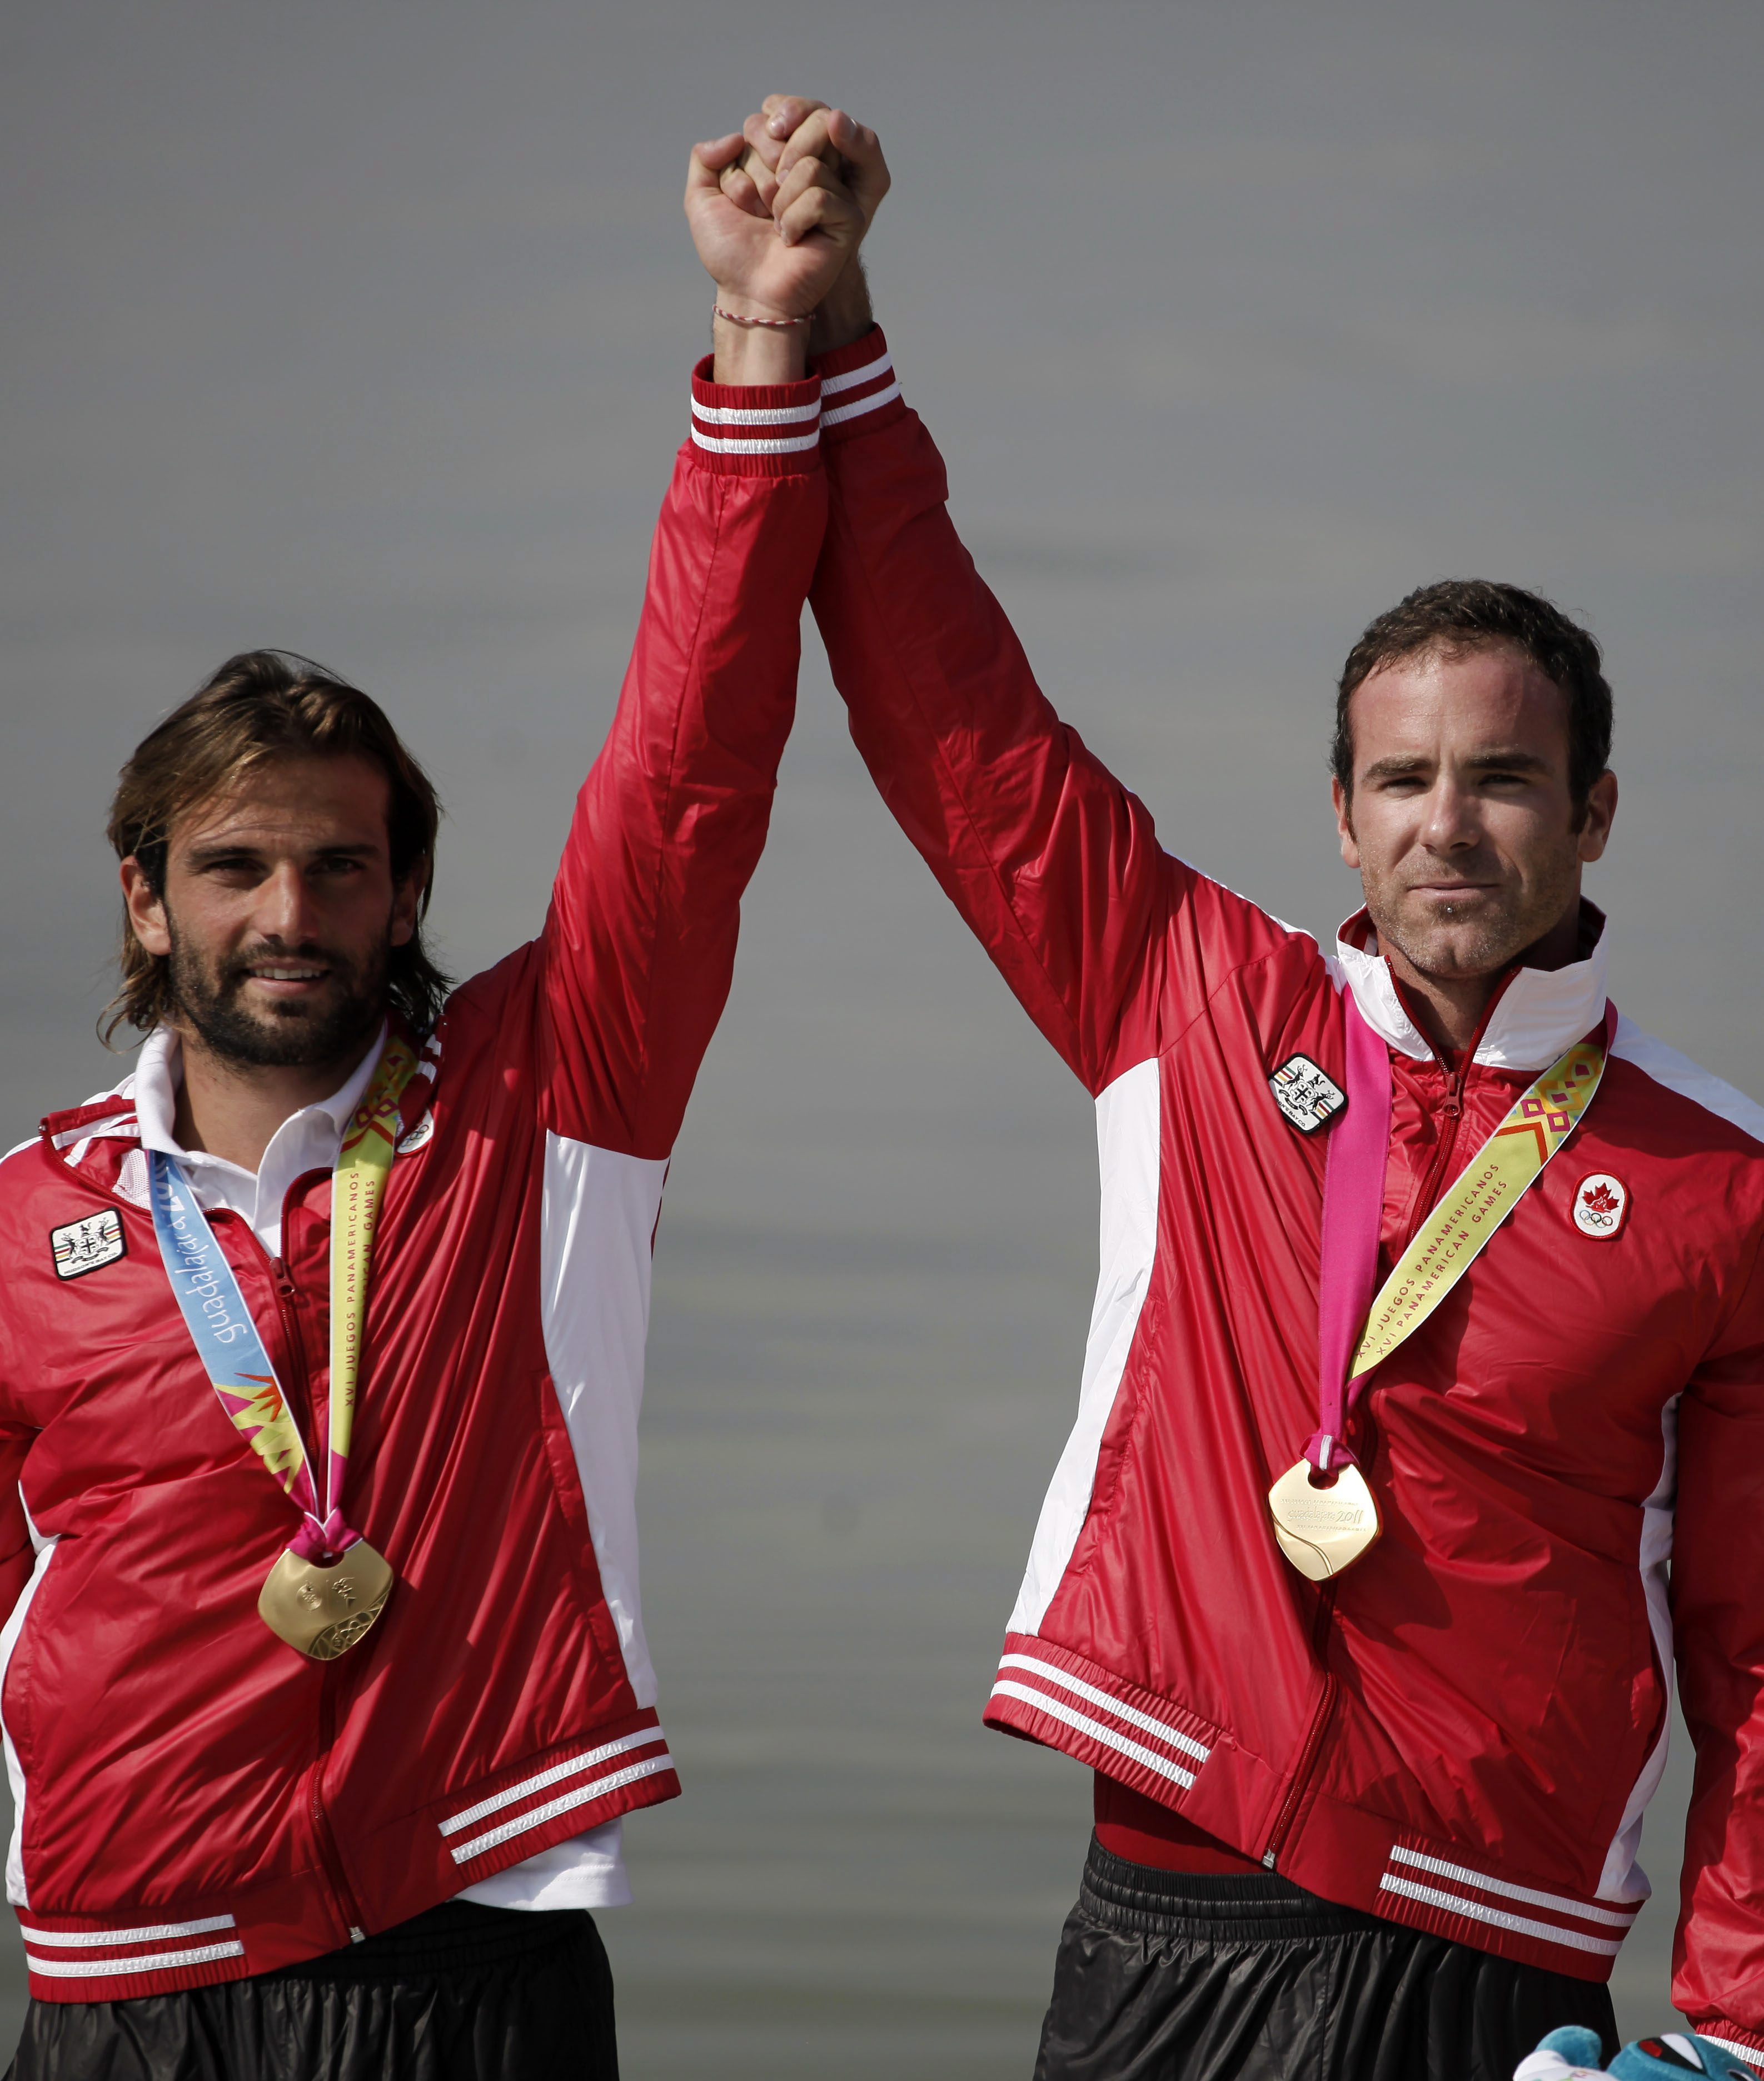 Gold medal winners Hugues Fournel, left, and Paul Cochrane from Canada celebrate on the winner's podium during the awards ceremony for the men's double K2 200m kayak event at the Pan American Games in Ciudad Guzman, Mexico, Saturday Oct. 29, 2011. (AP Photo/Eduardo Verdugo)